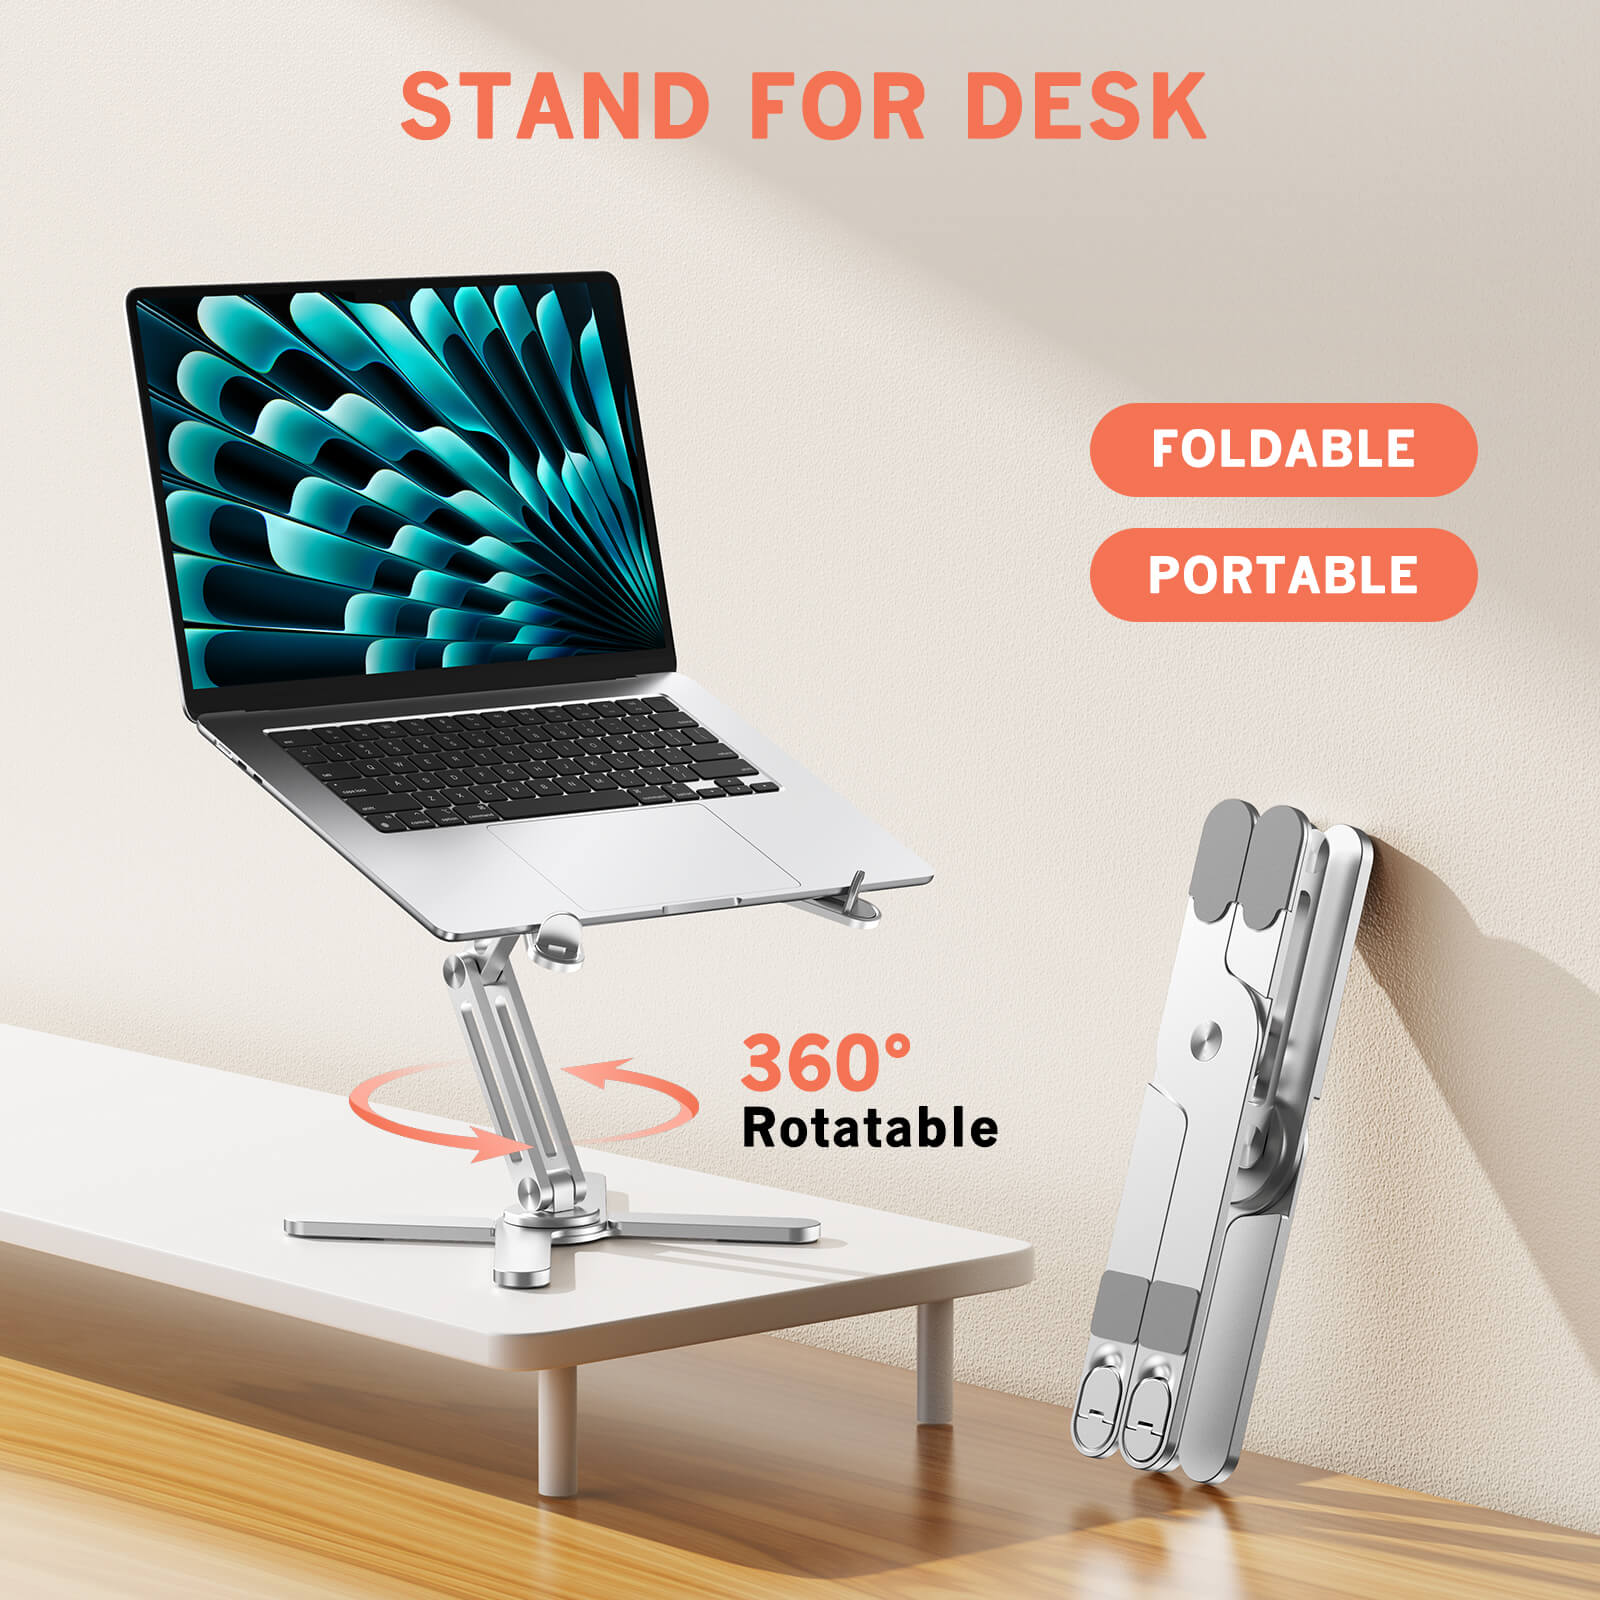 360° Rotation Laptop Stand